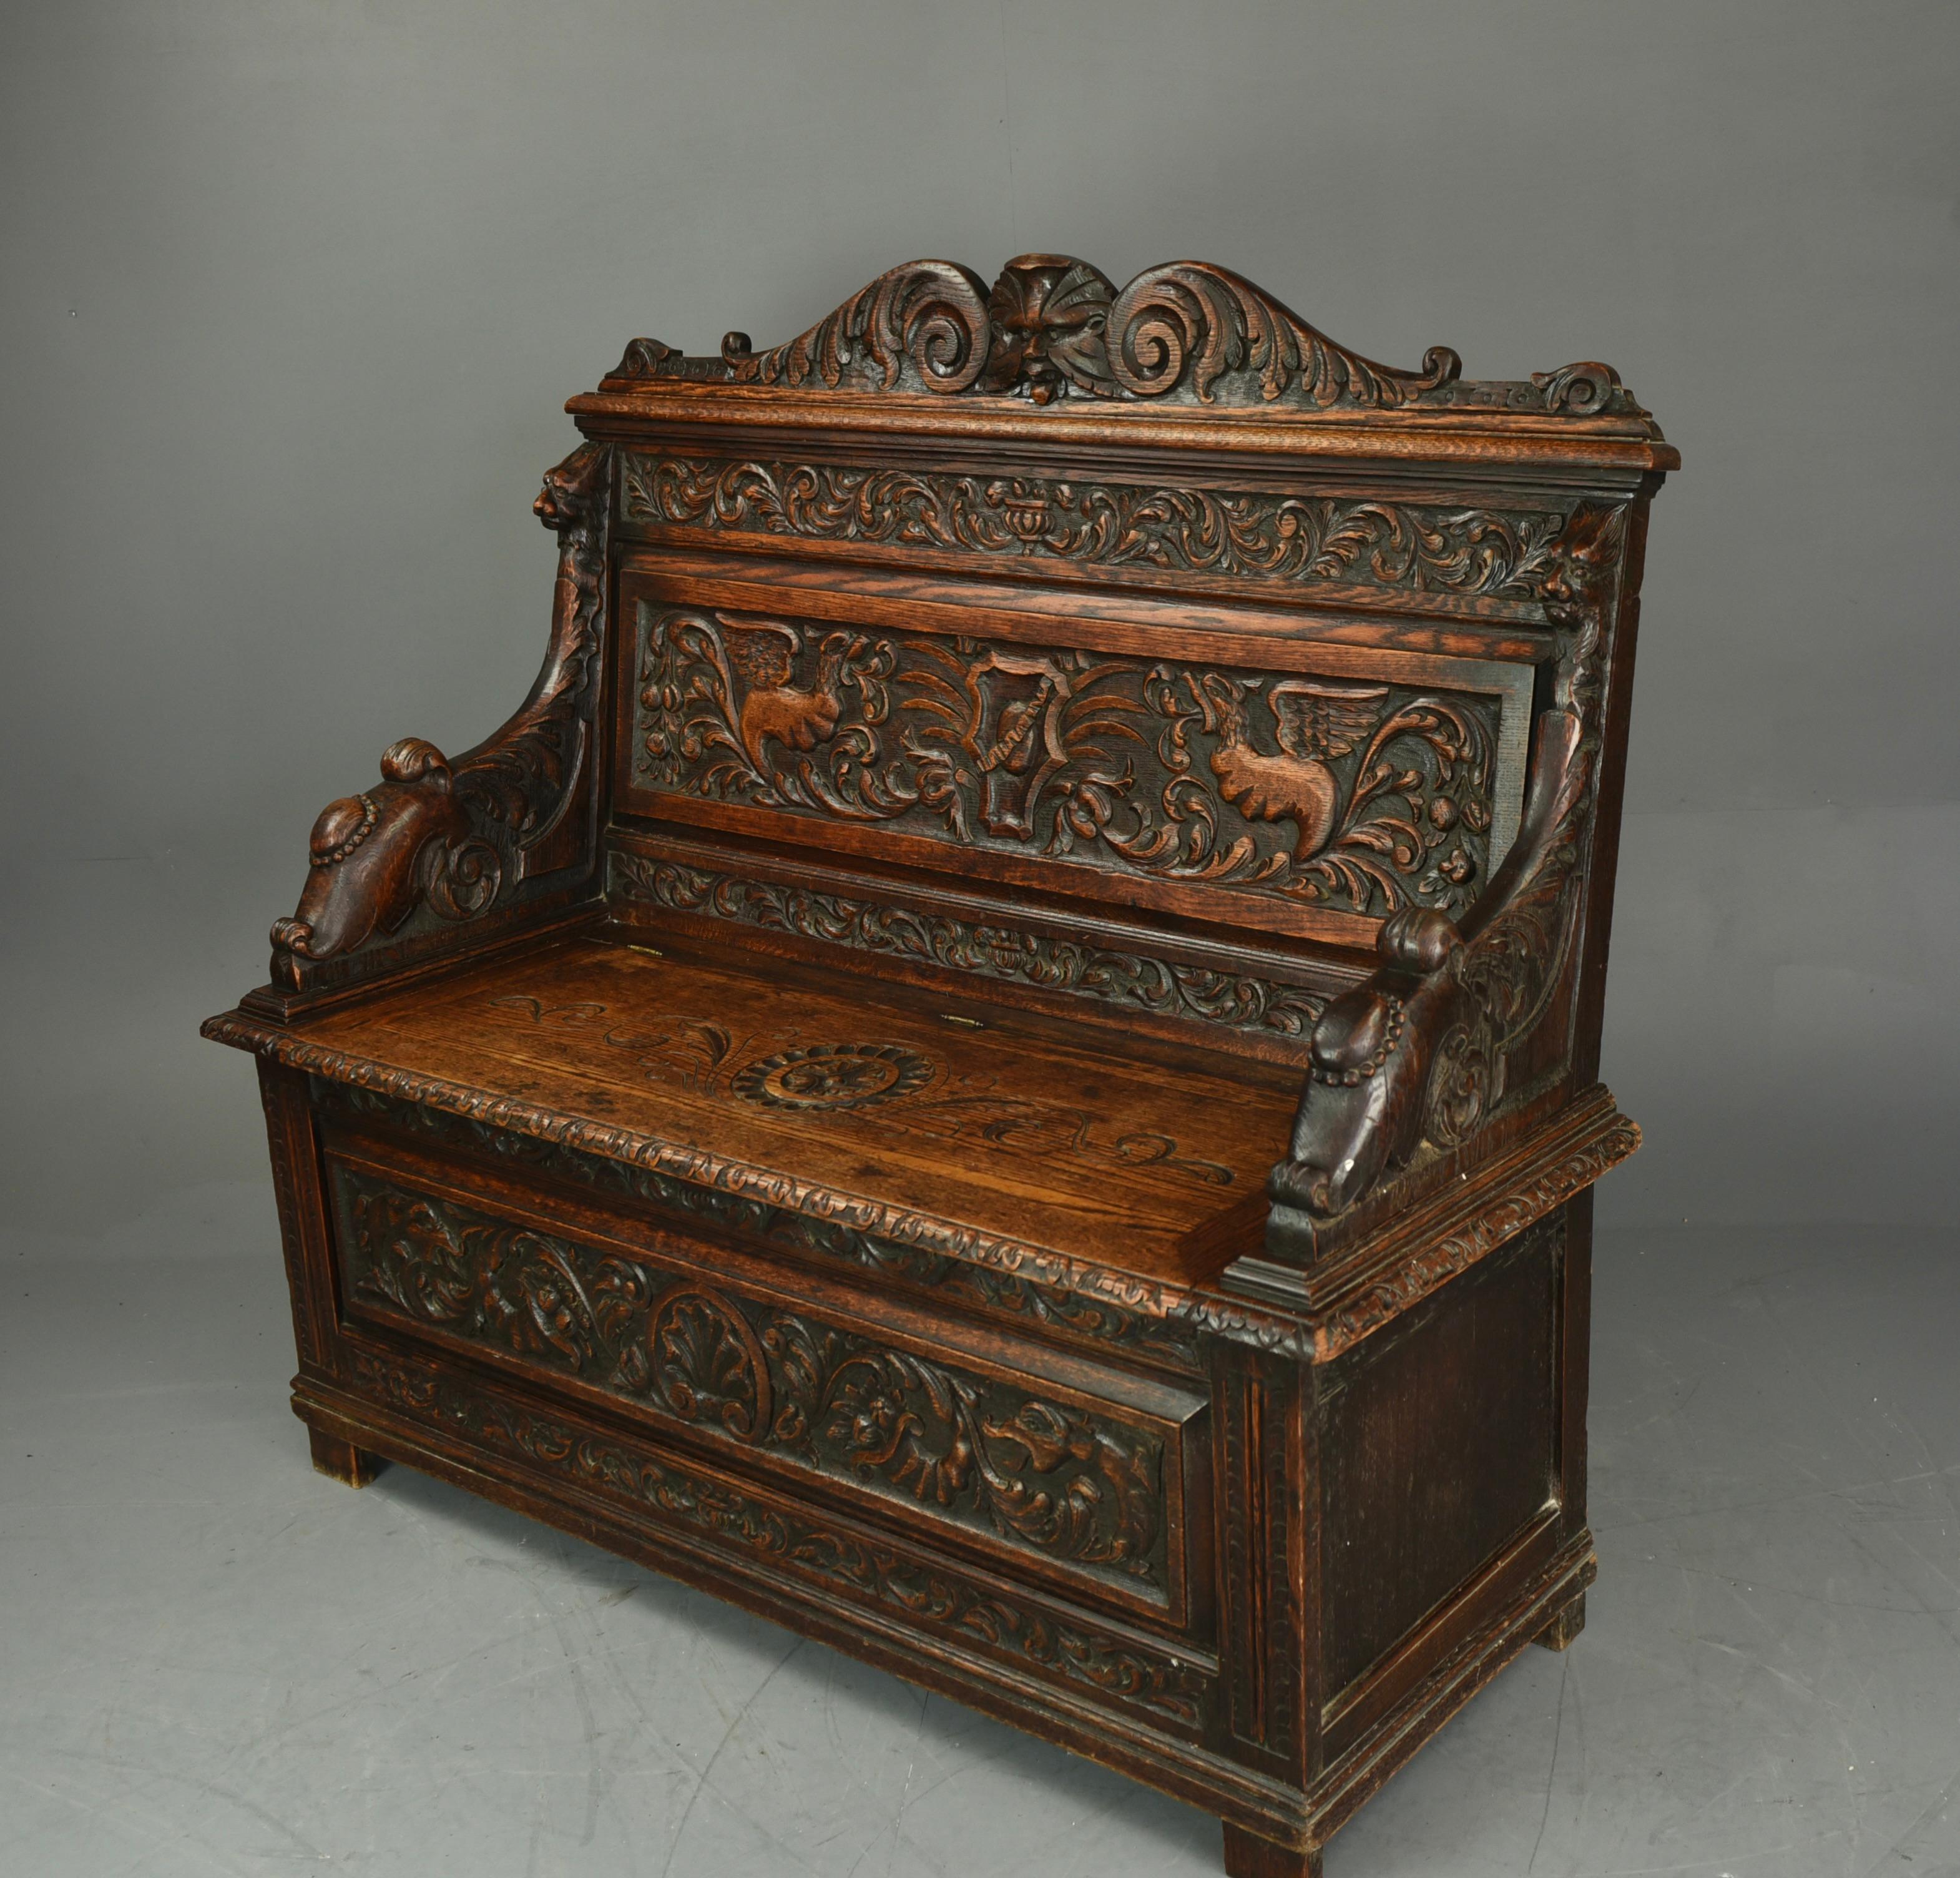 Stunning carved oak settle hall seat. The quality of the carving is excellent with the front, arms and back rest all profusely decorated.The back with carved oak green man crest The lift up seat to provides storage for boots, shoes, bags etc. This